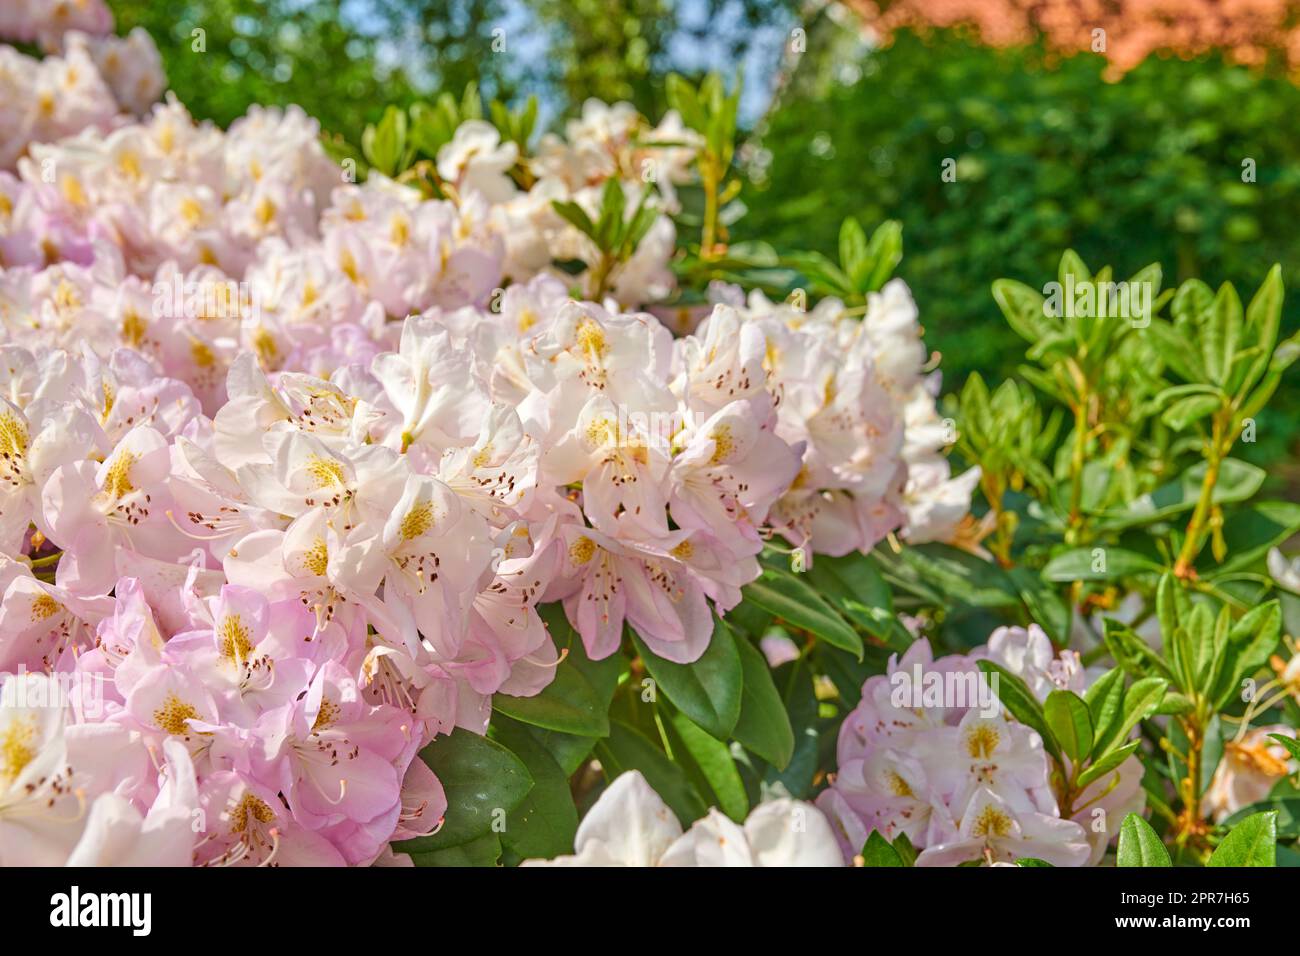 Rhododendron is a genus of 1,024 species of woody plants in the heath family, either evergreen or deciduous, and found mainly in Asia, although it is also widespread throughout the Southern Highlands of the Appalachian Mountains of North America. Stock Photo